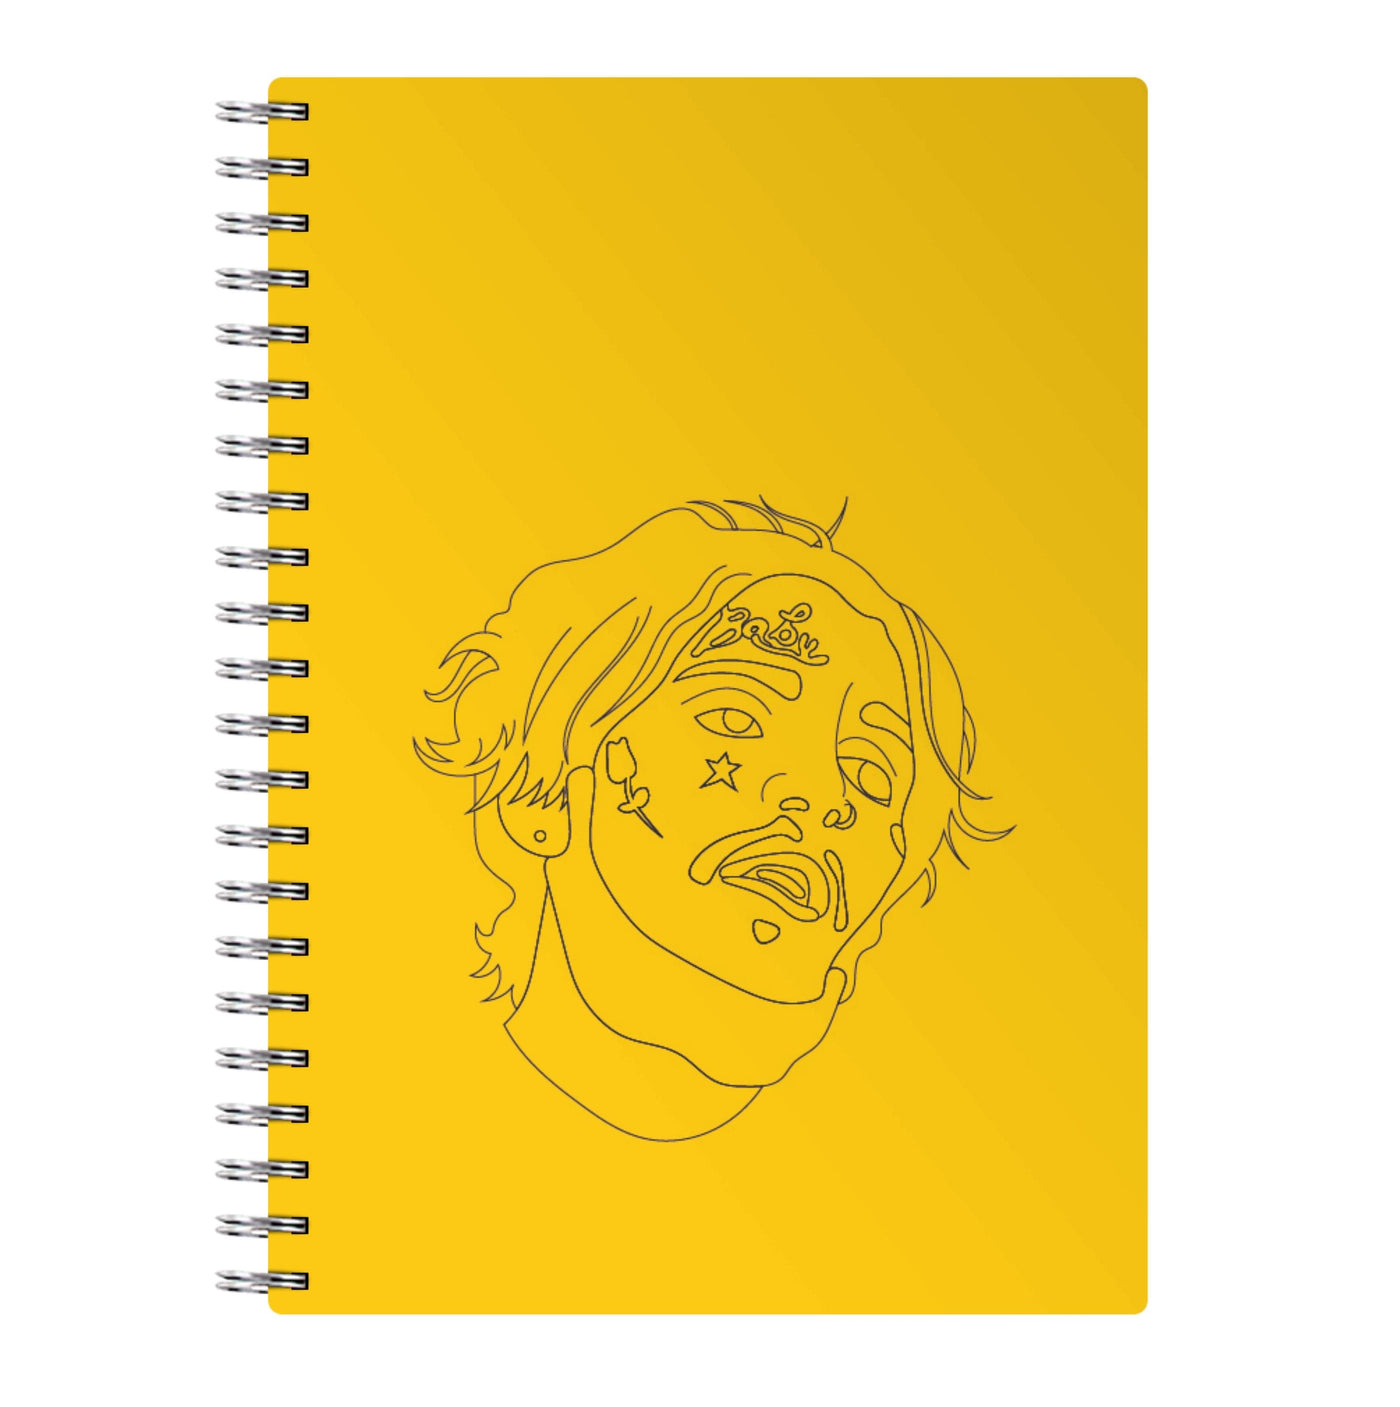 Lil Peep Outline Notebook